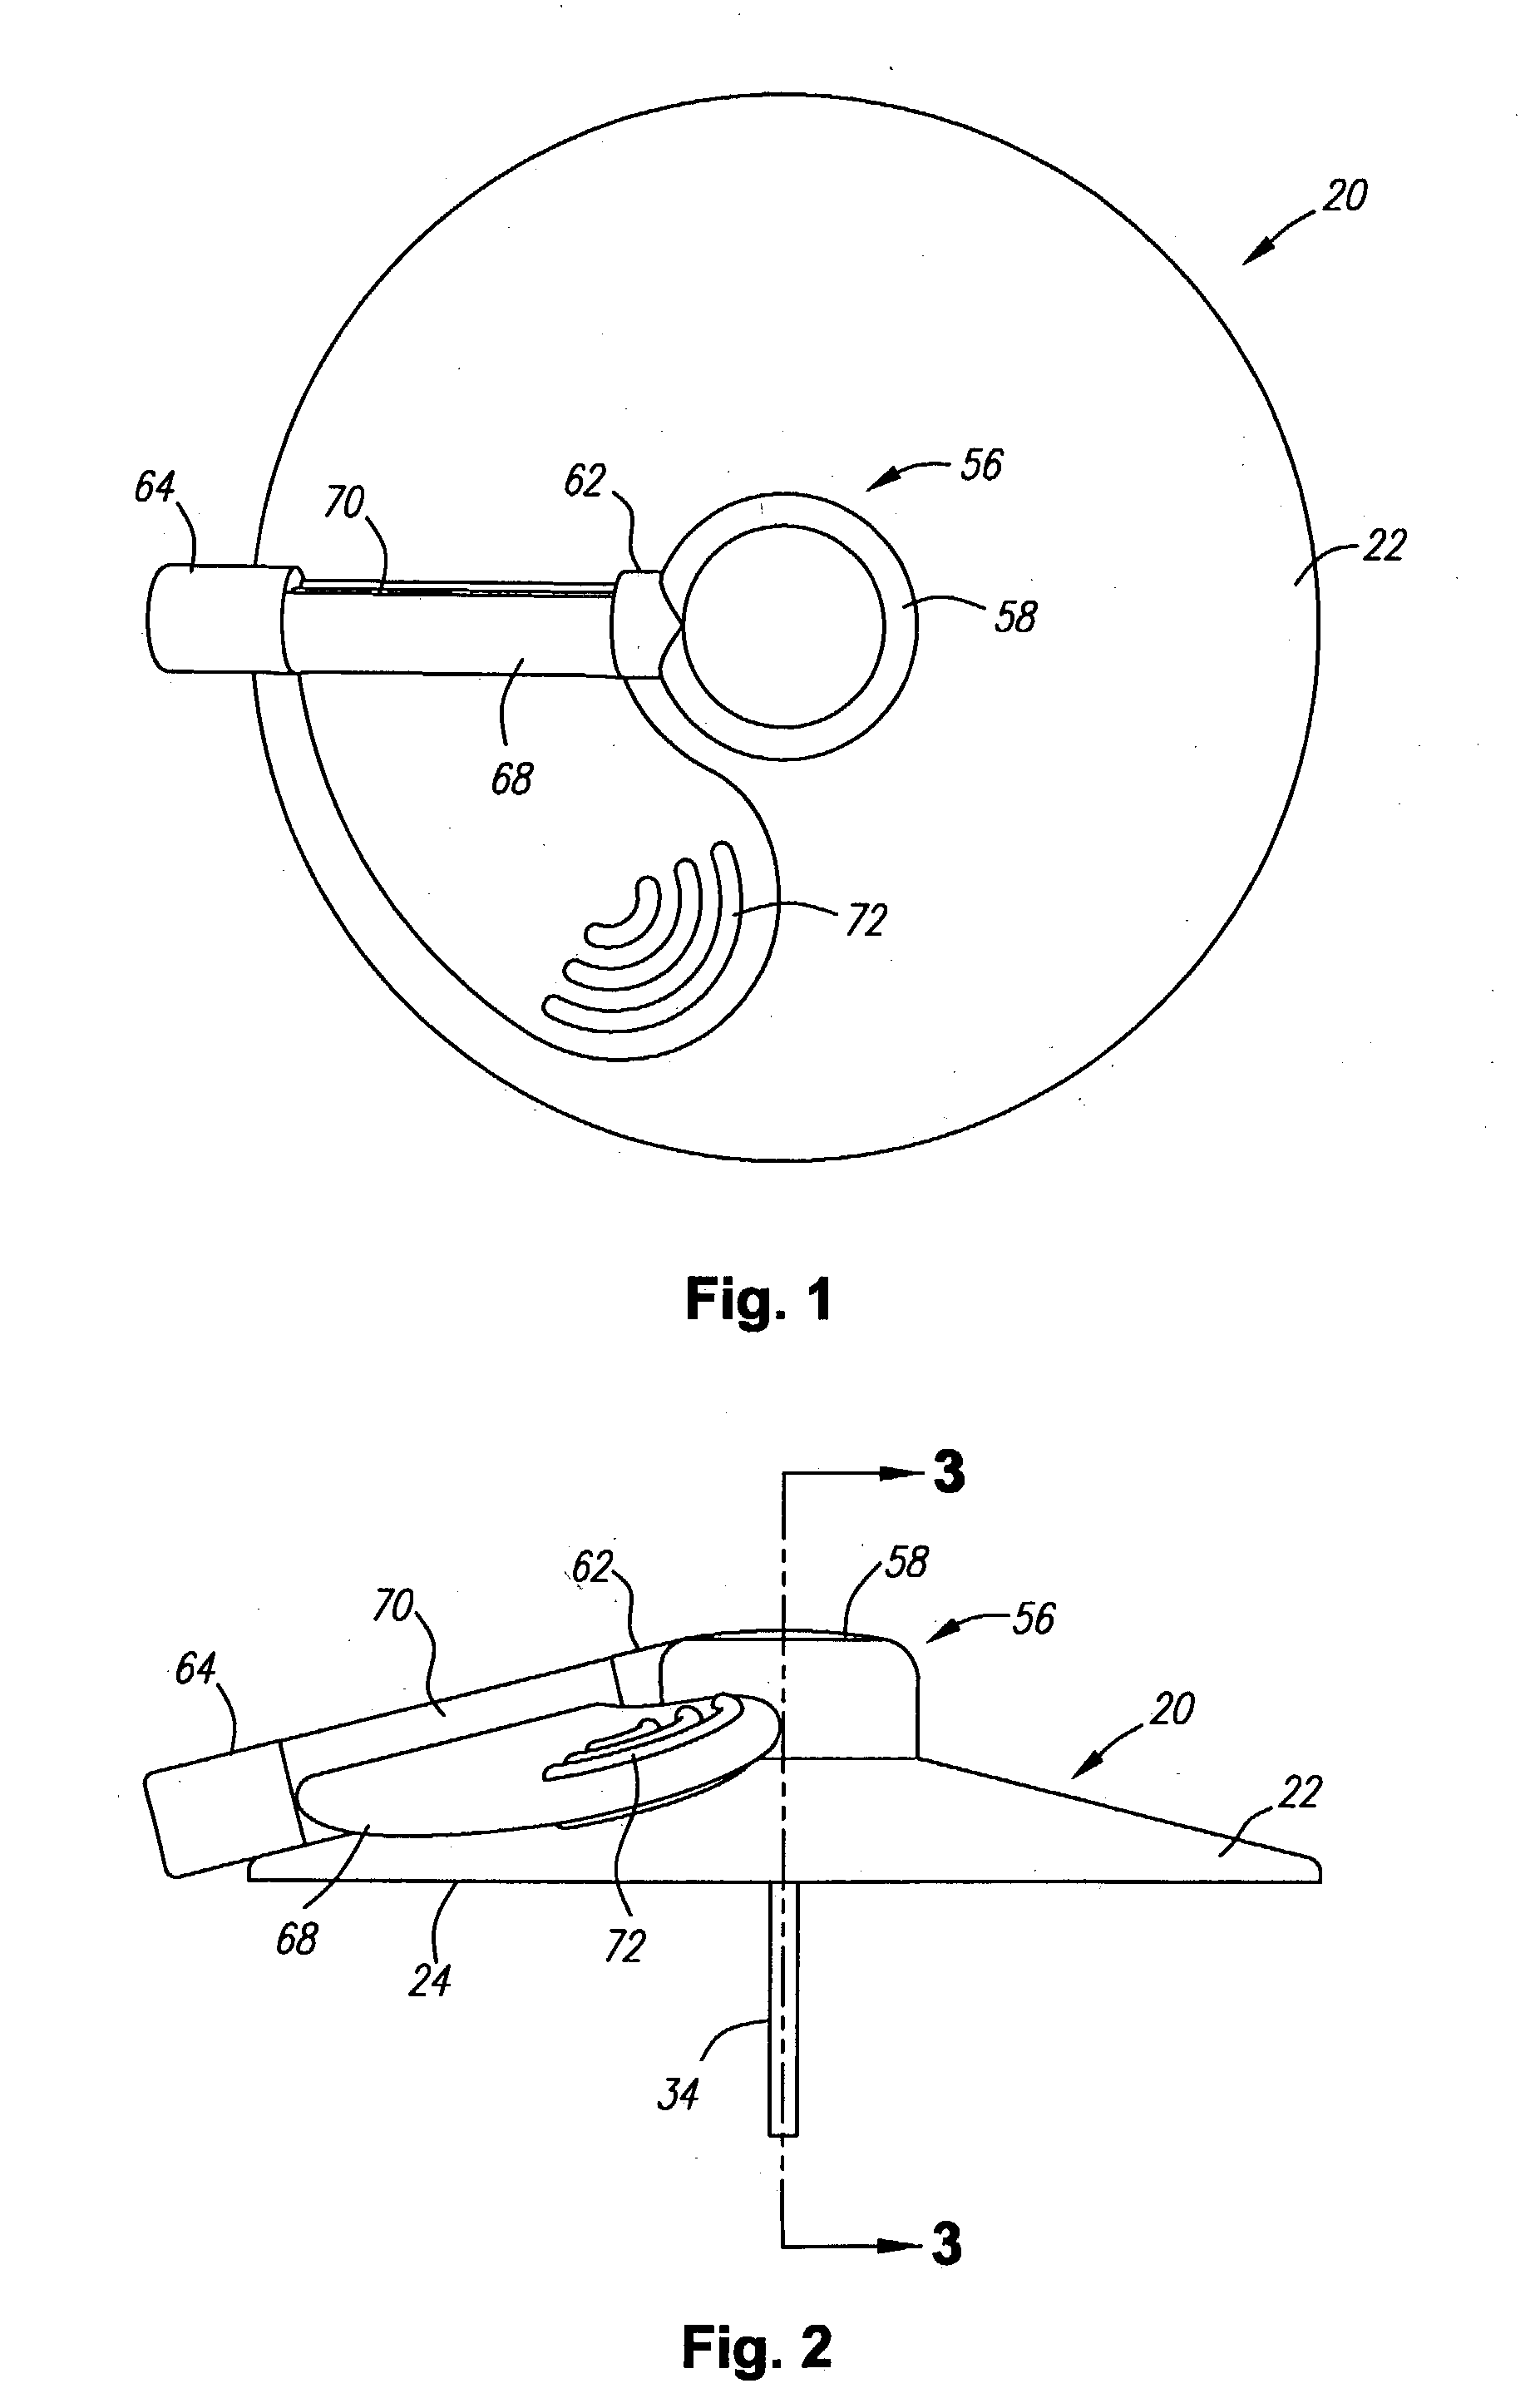 Apparatus and method for delivery of therapeutic and/or diagnostic agents